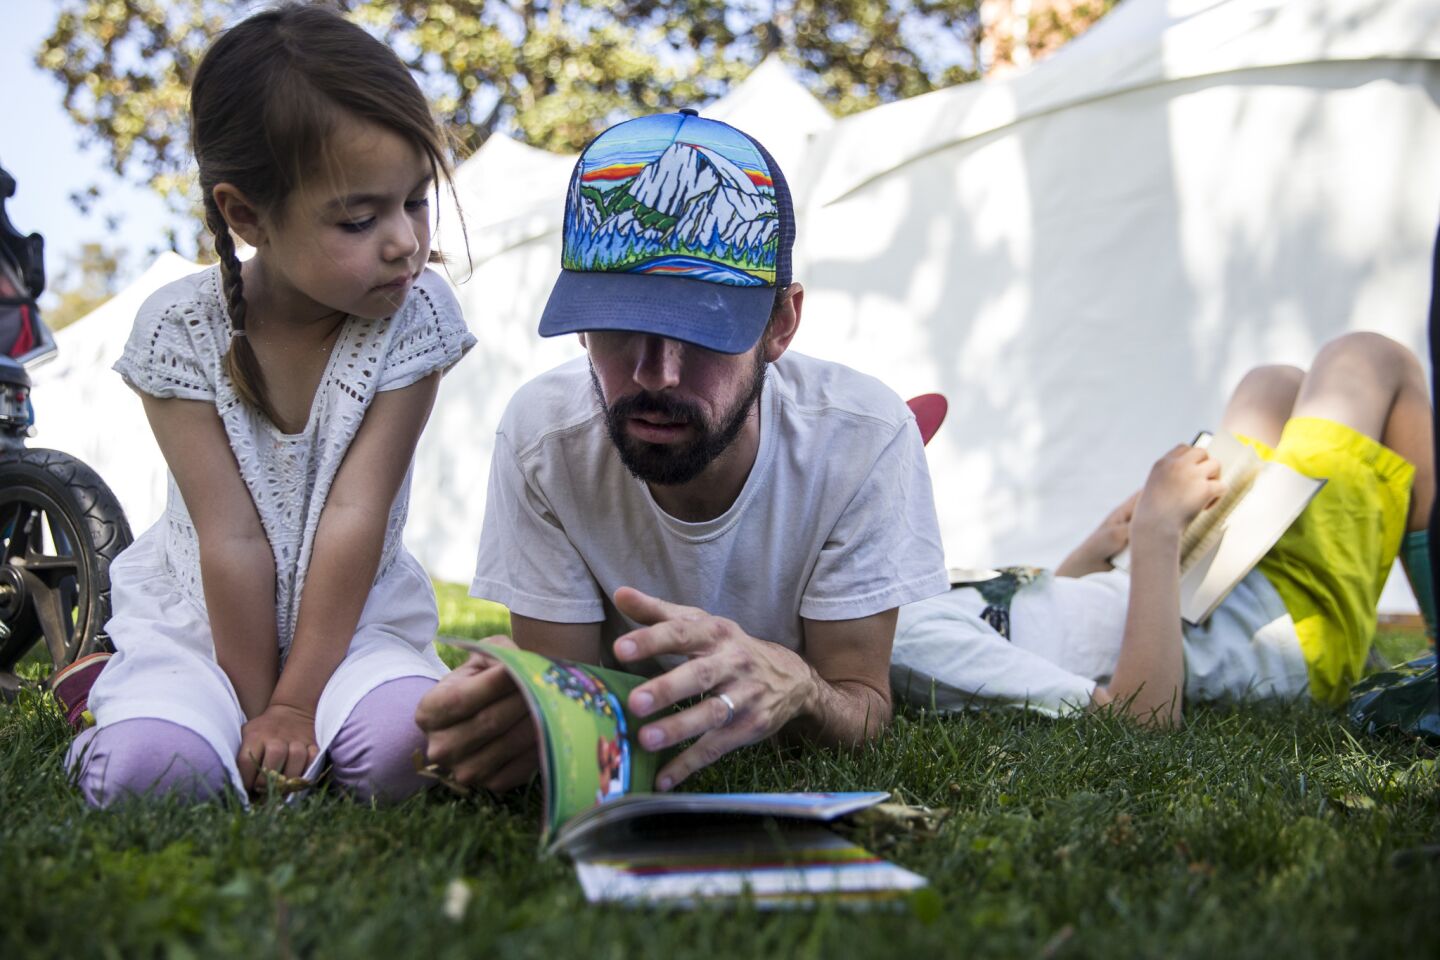 Aurora Carrillo-Vincent, 5, and Matthew Carrillo-Vincent, 35, read together during the Los Angeles Times Festival of Books at USC on Sunday.